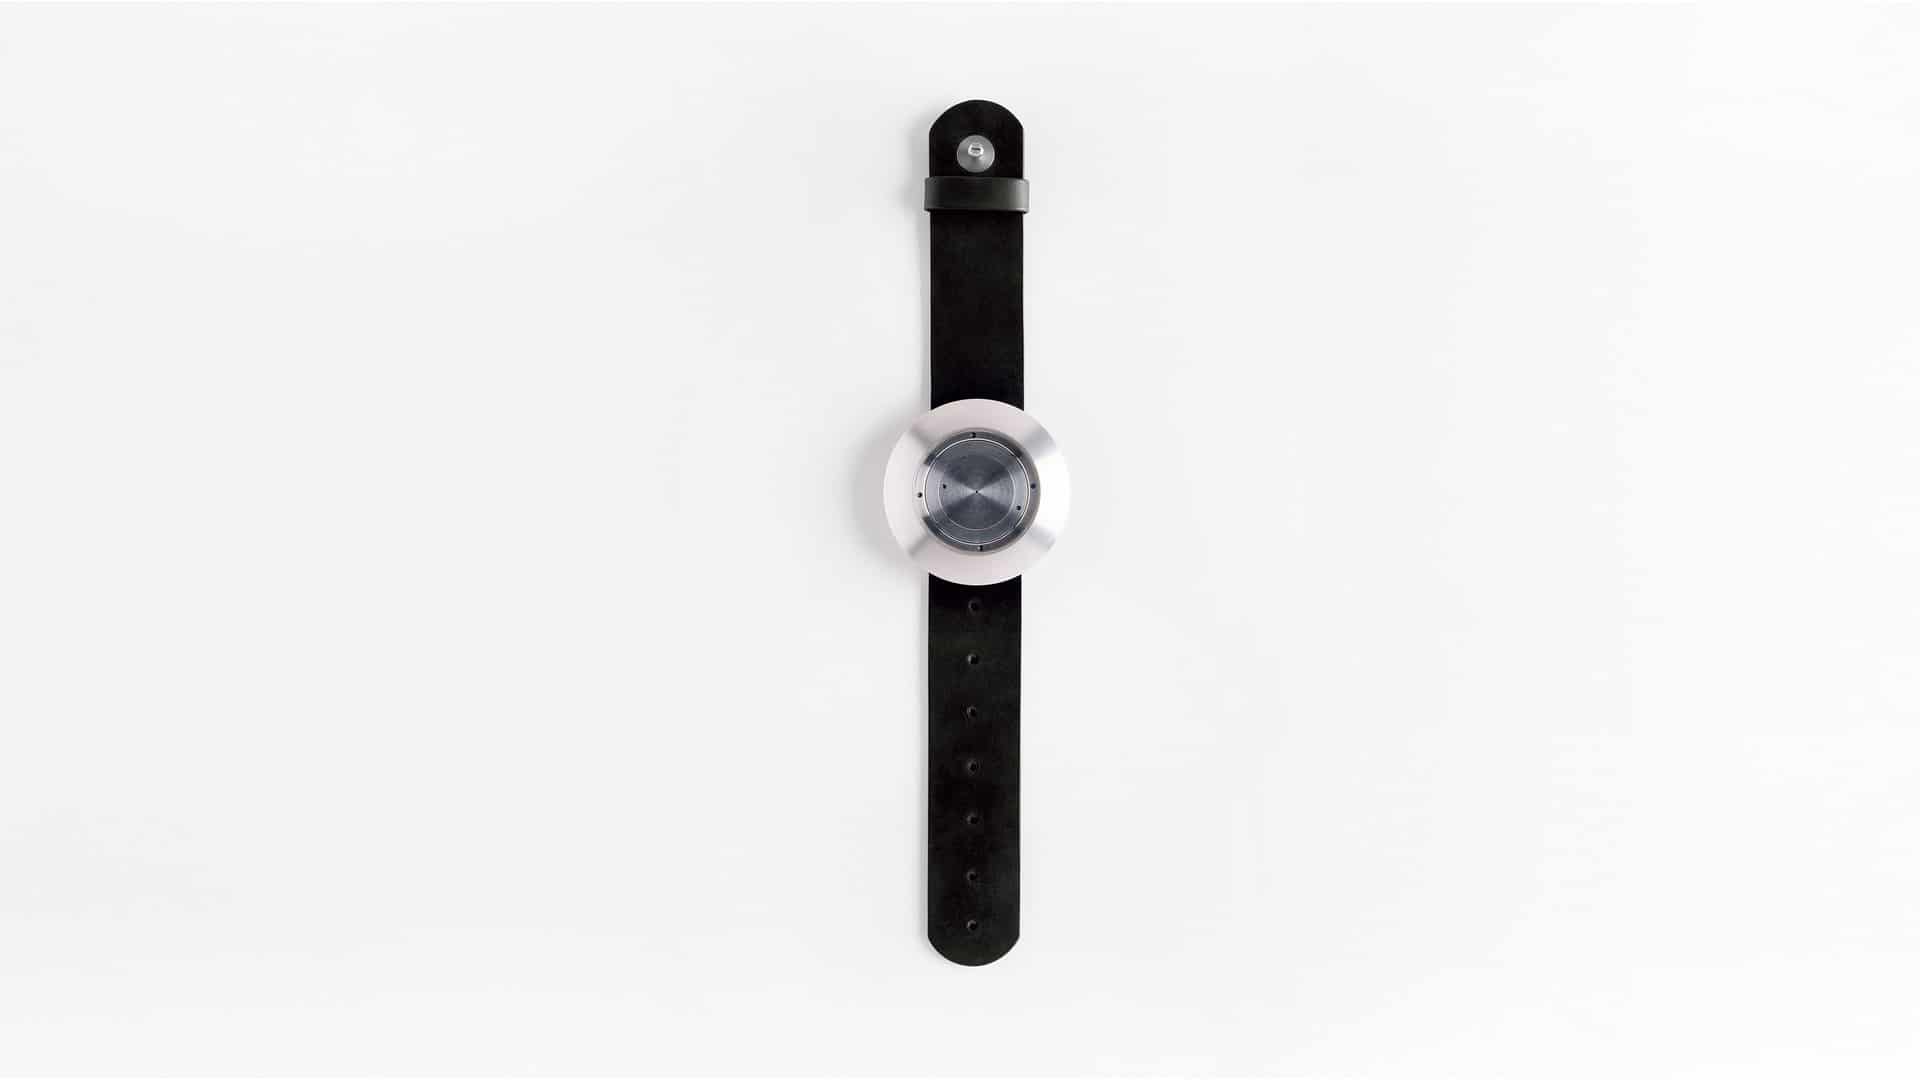 Ikepod] Isopode Dual Time, designed by Mark Newson in the 90s : r/Watches